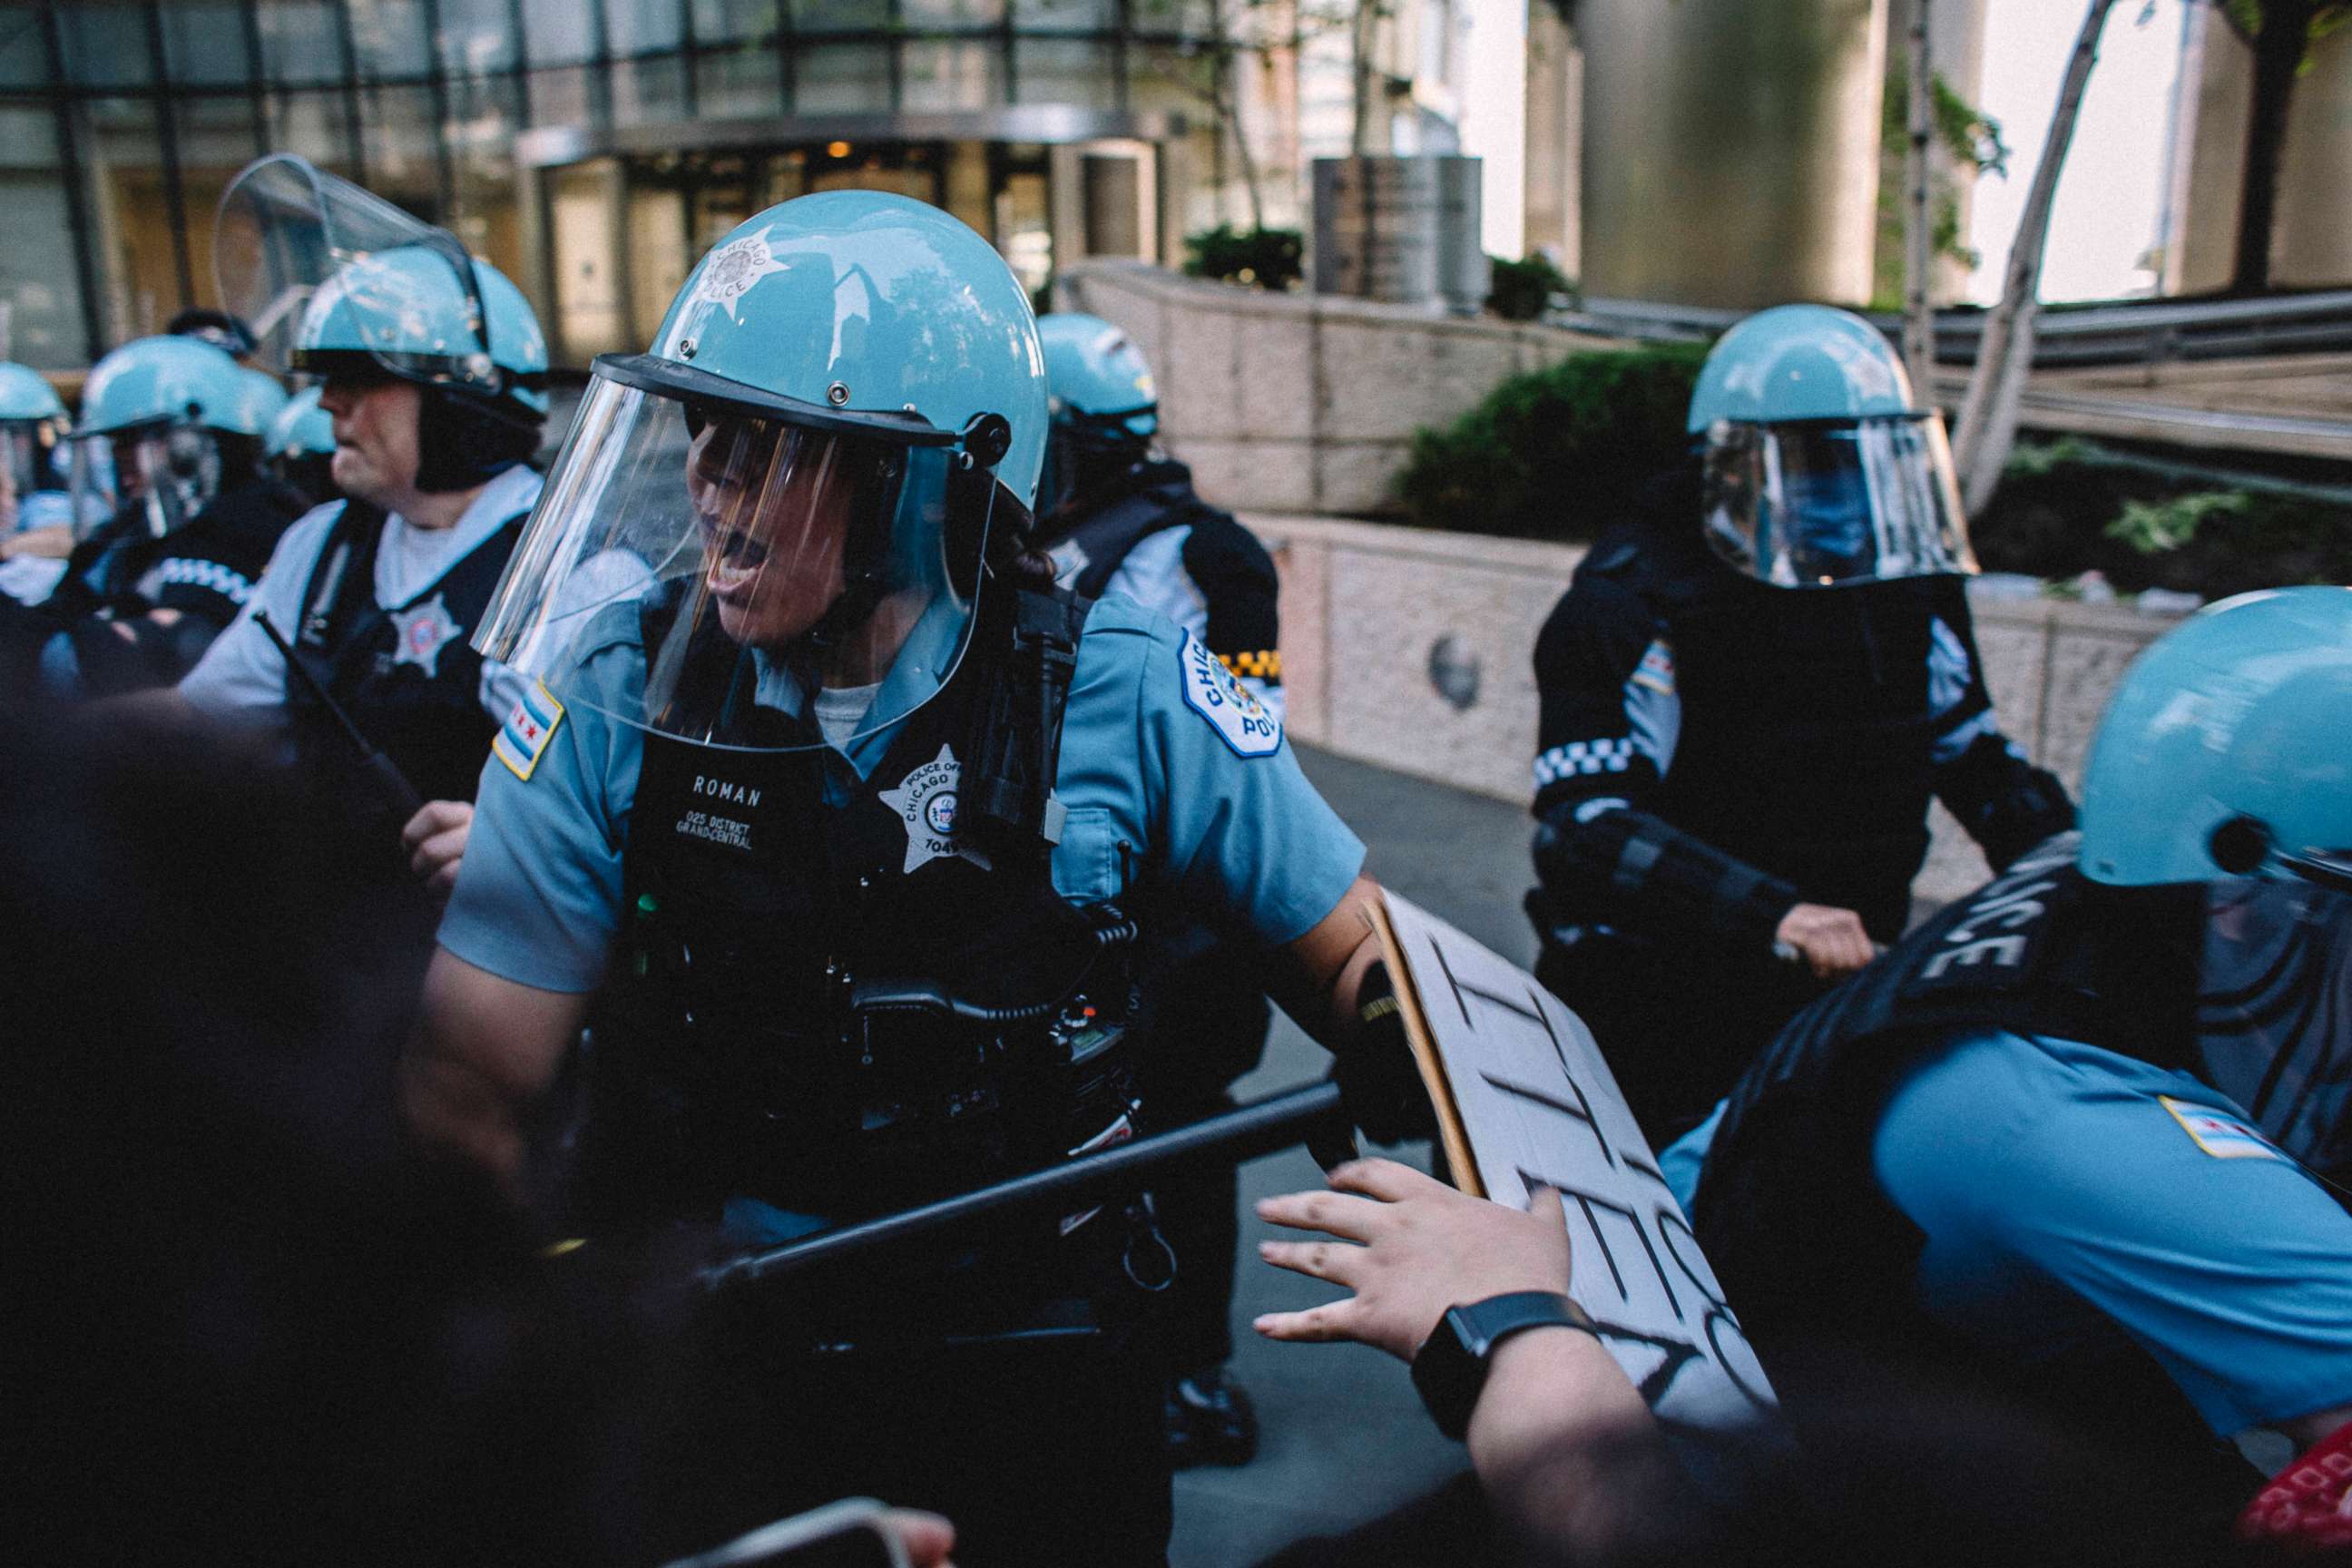 PHOTO: Protesters clash with police in Chicago, May 30, 2020, during a protest against the death of George Floyd.